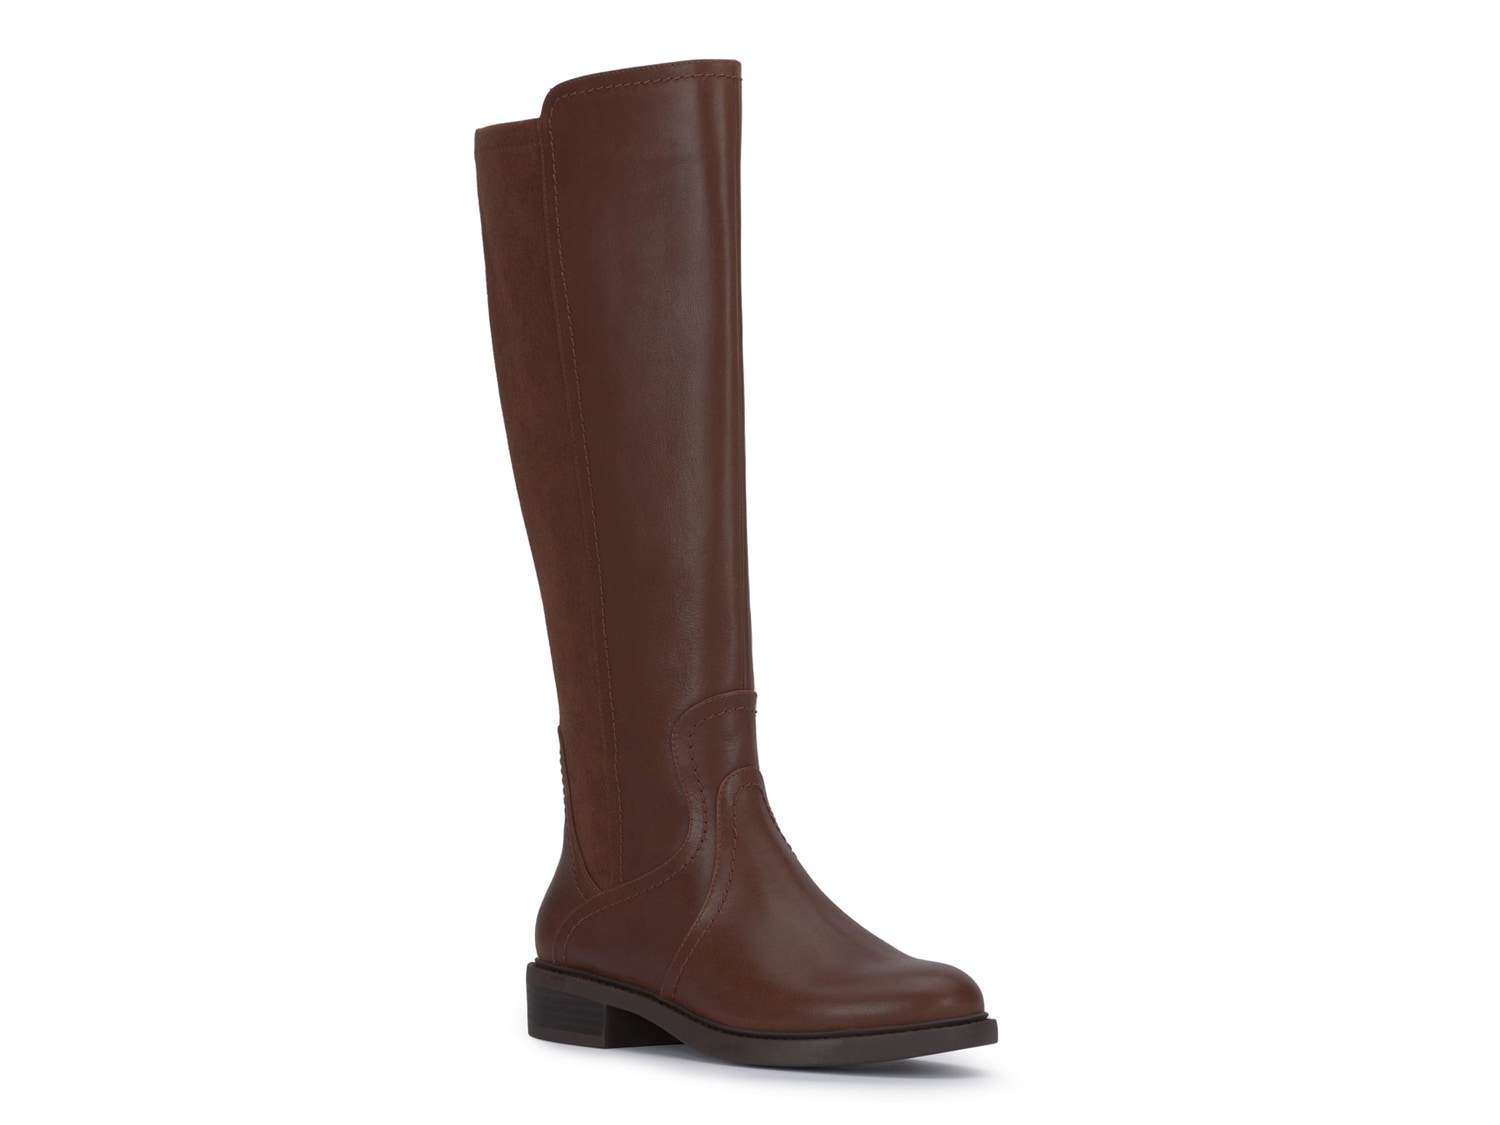 Journee Collection Womens Spokane Studded Knee High Riding Boots Regular  and Wide Calf with Block Heel, Brown (Extra Wide Calf), 10